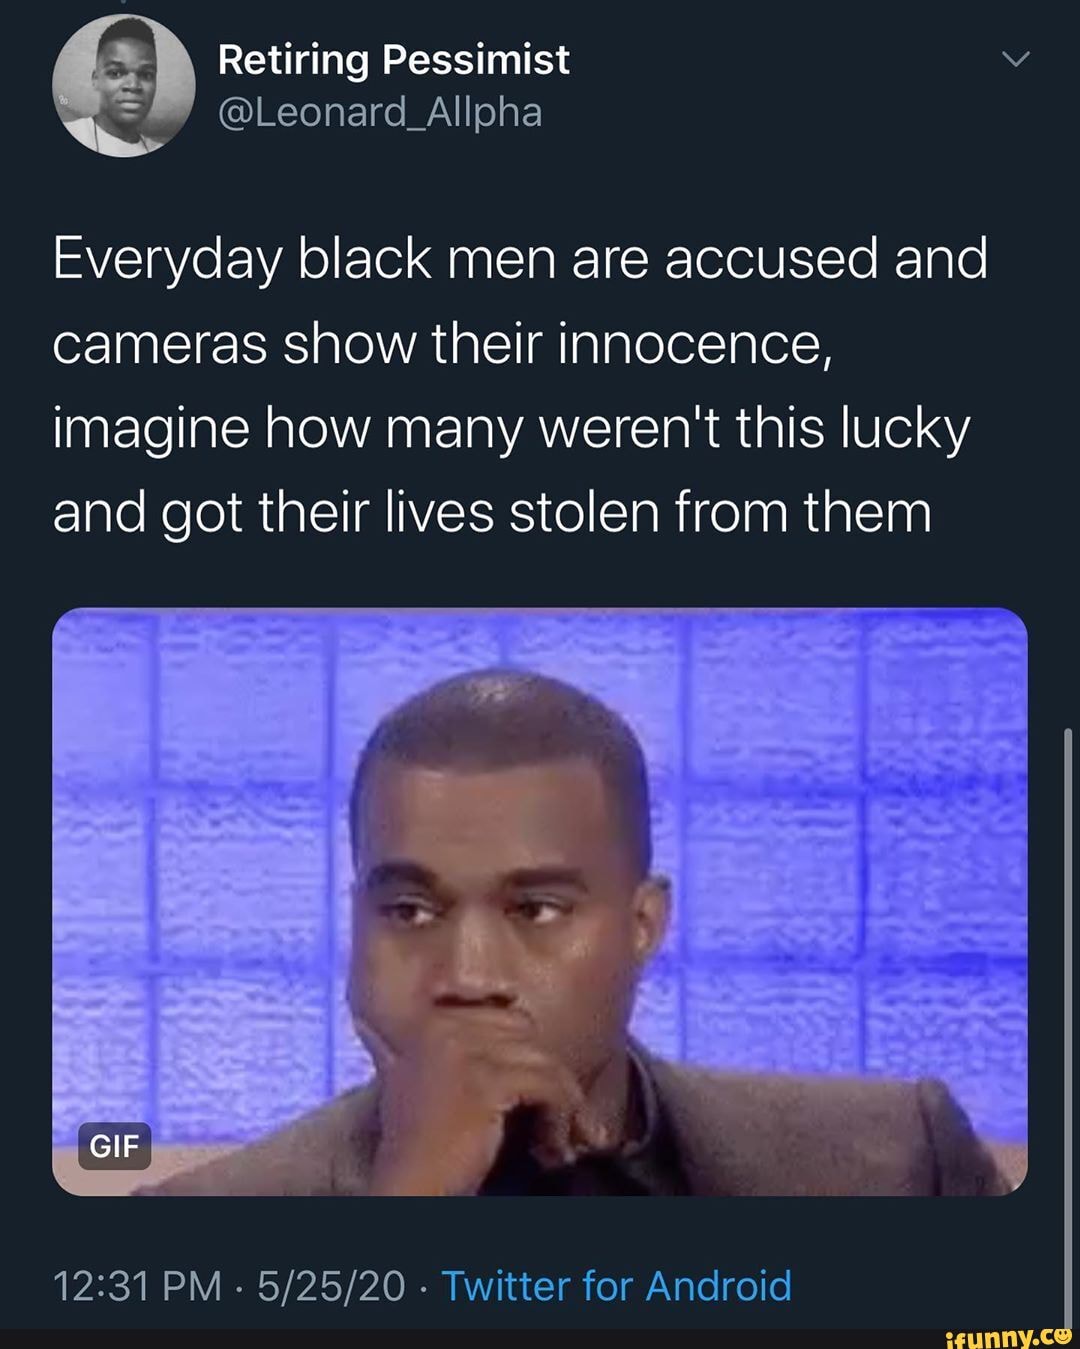 Everyday black men are accused and cameras show their innocence ...